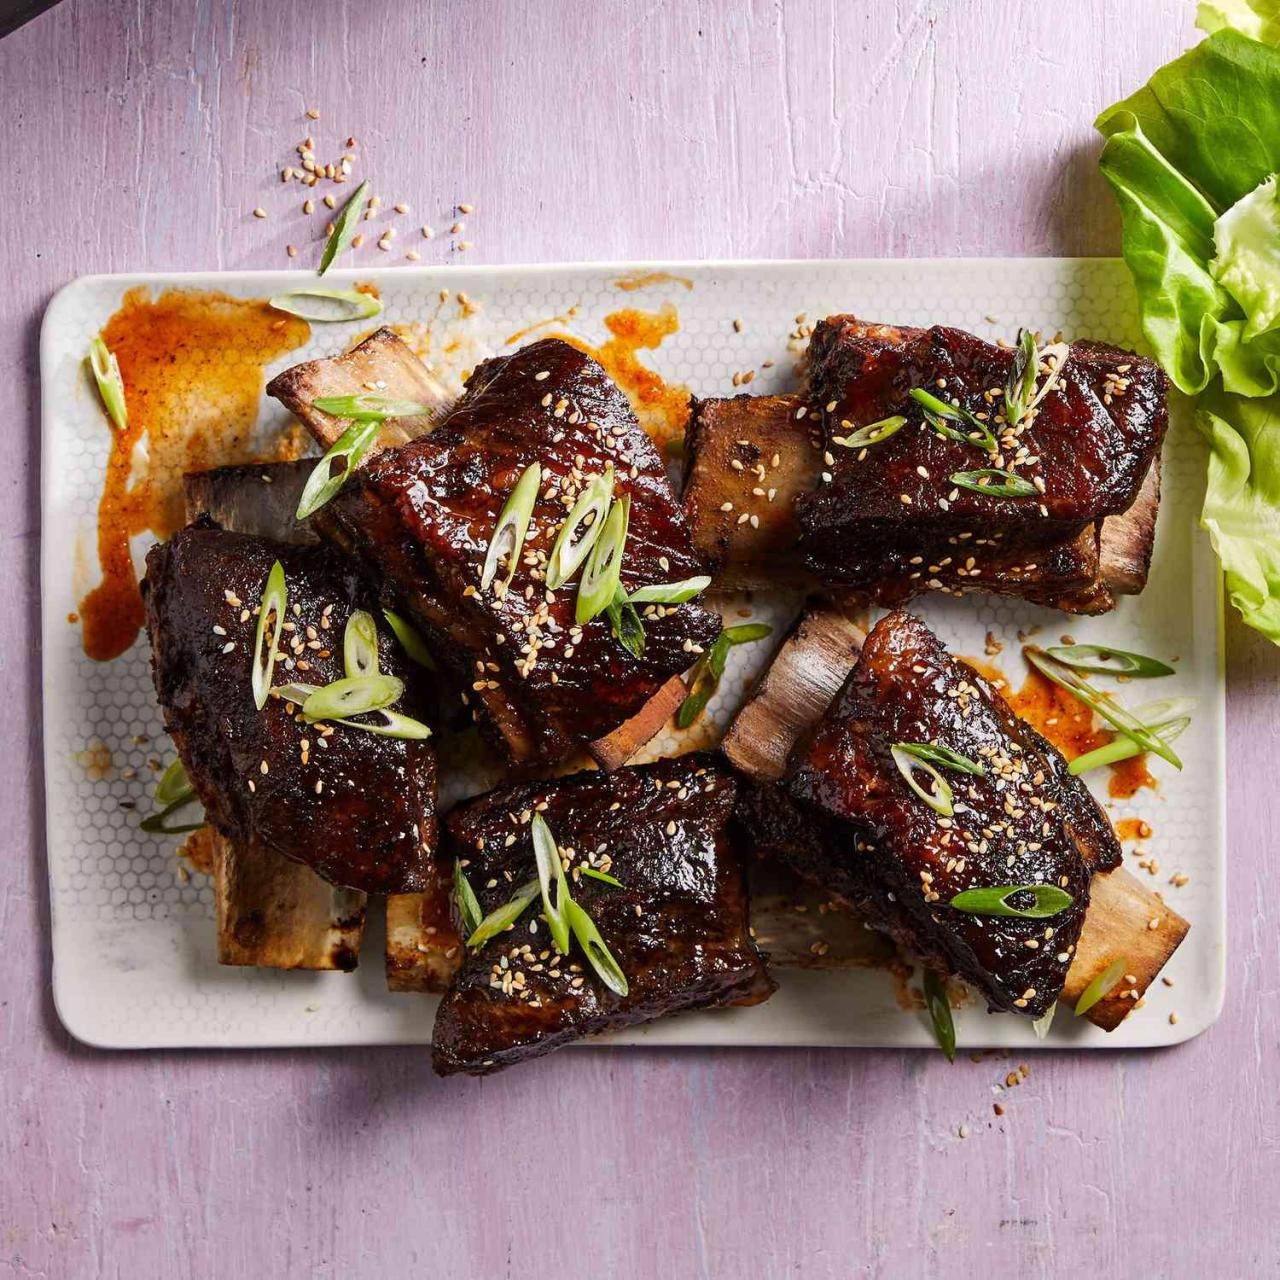 Cocoa Braised Short Ribs of Beef